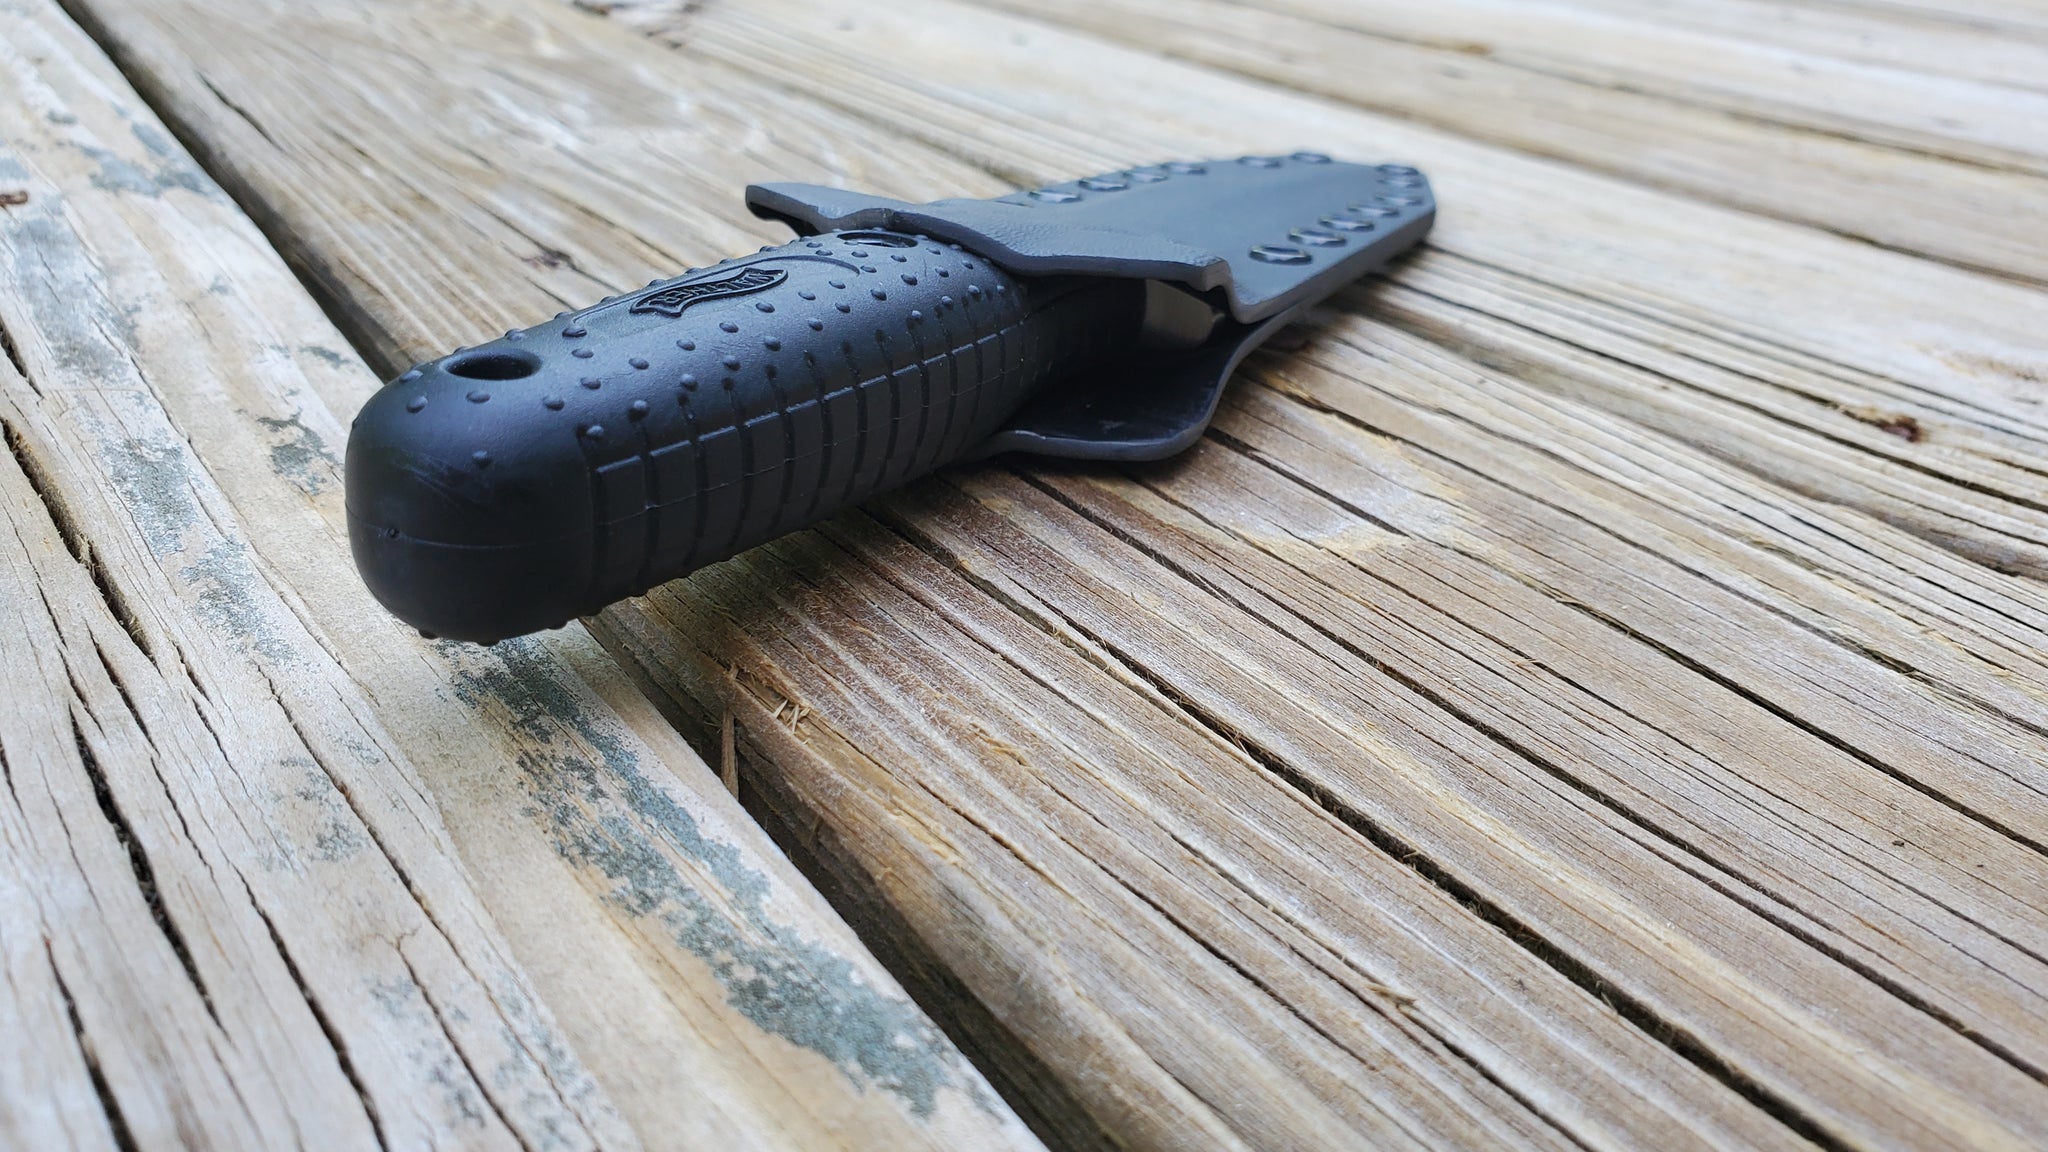 WALTHER P99 Tactical Knife Kydex Sheath